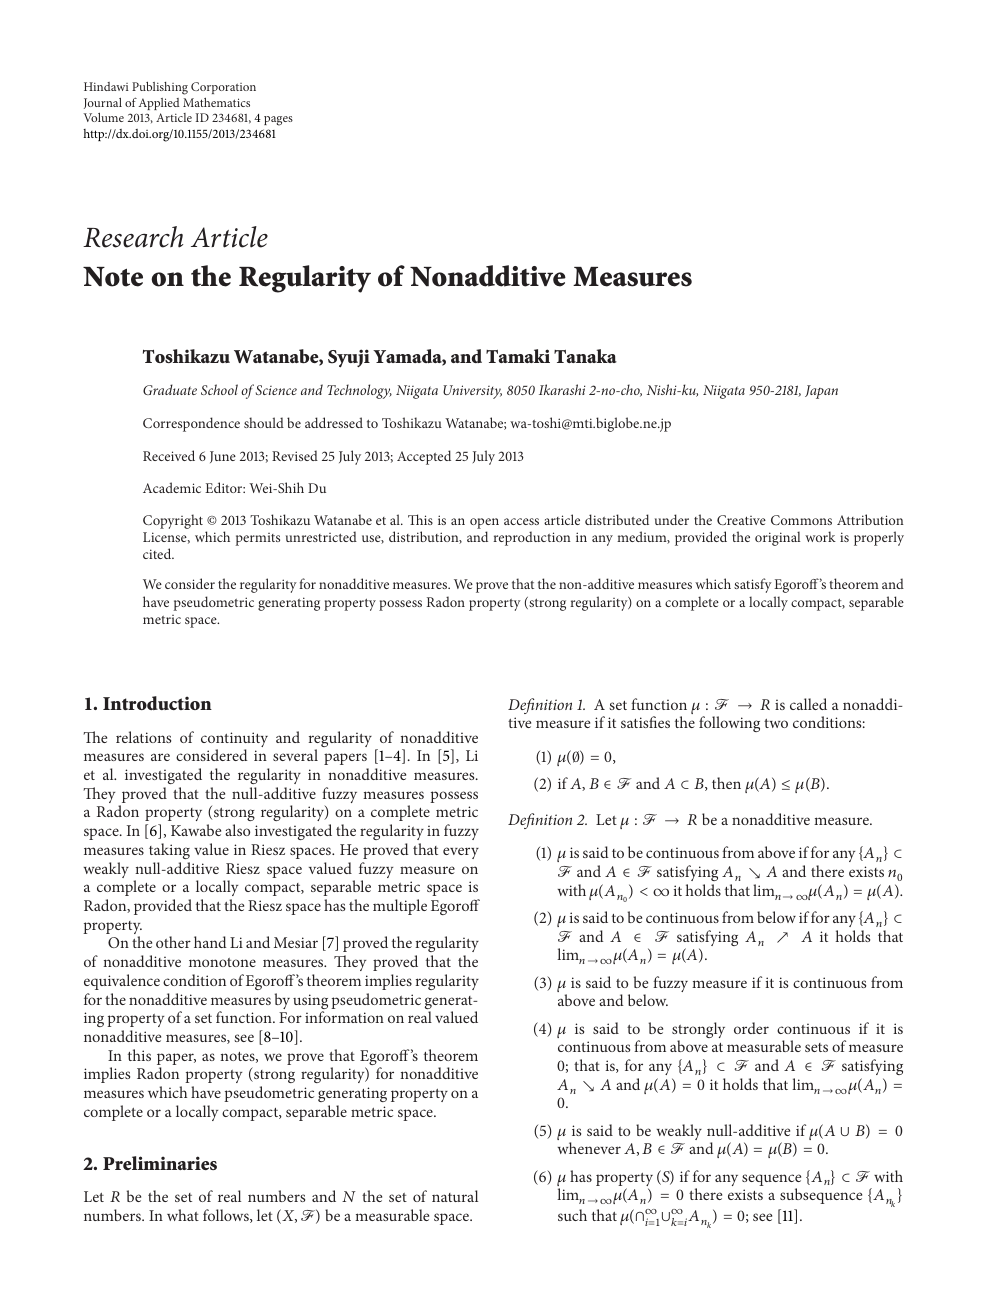 Note On The Regularity Of Nonadditive Measures Topic Of Research Paper In Mathematics Download Scholarly Article Pdf And Read For Free On Cyberleninka Open Science Hub